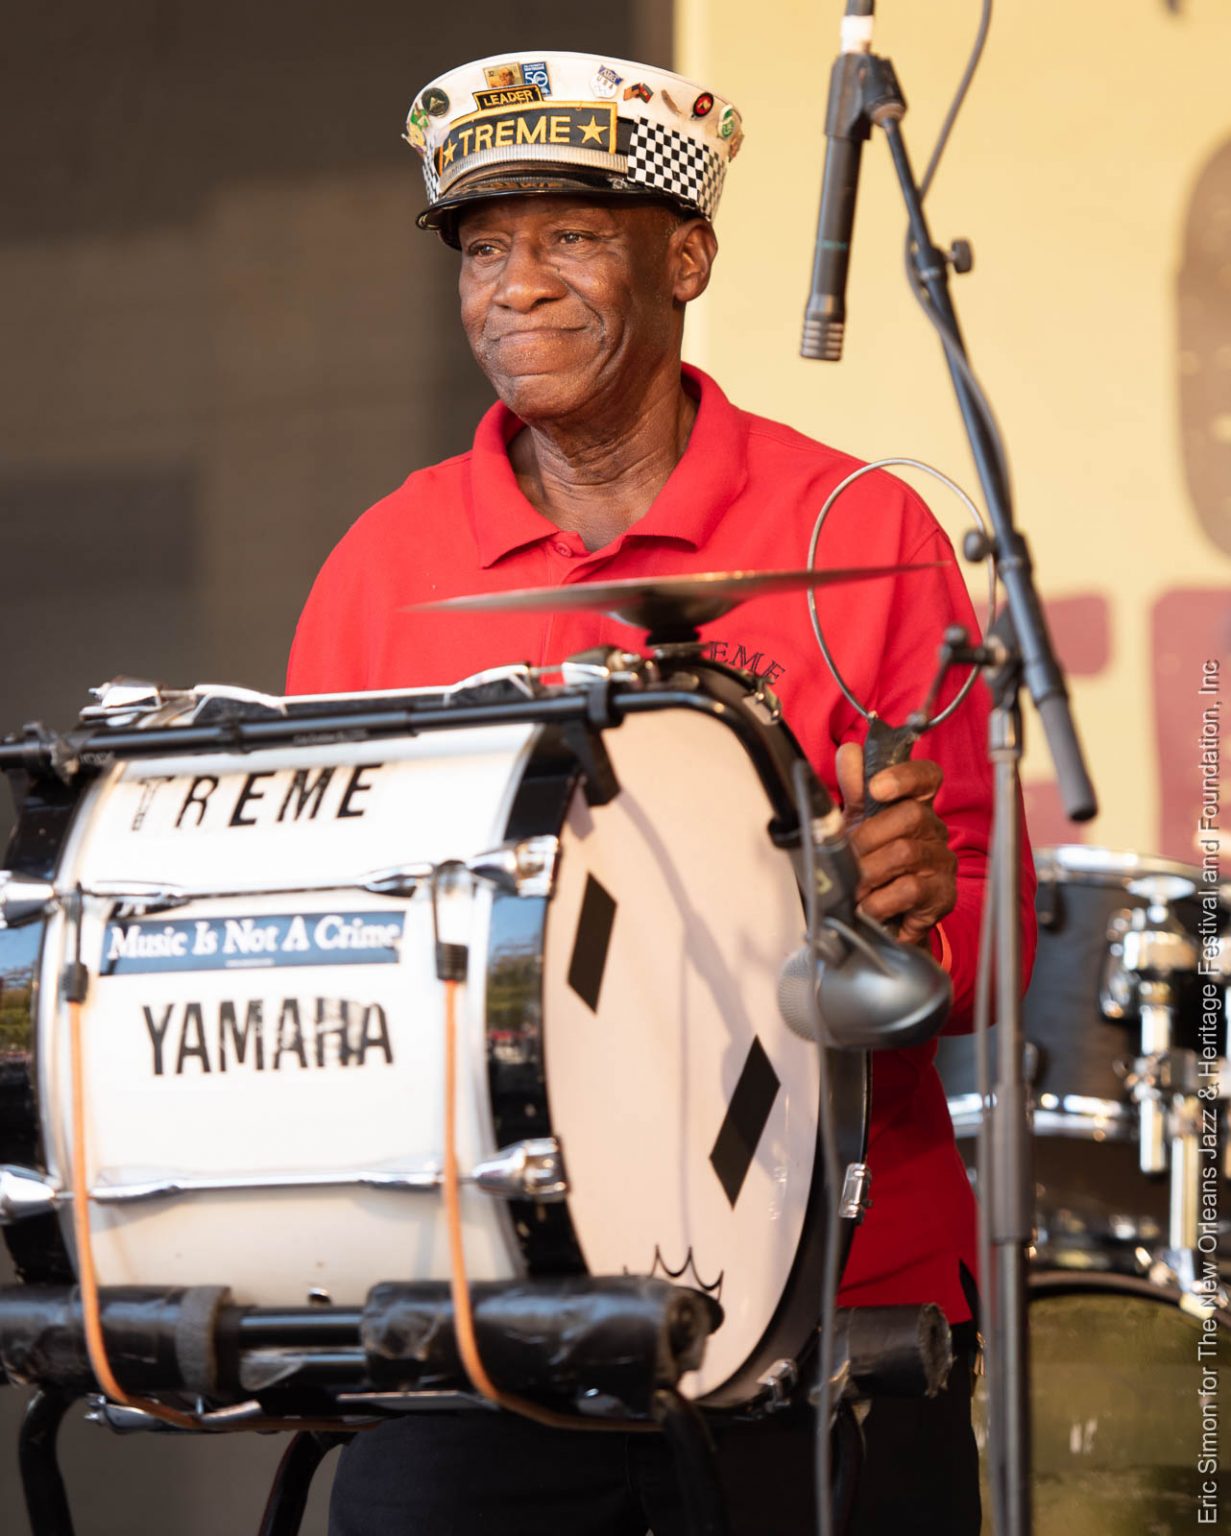 2018 Treme Creole Gumbo Festival, Music, New Orleans, Treme Brass Band